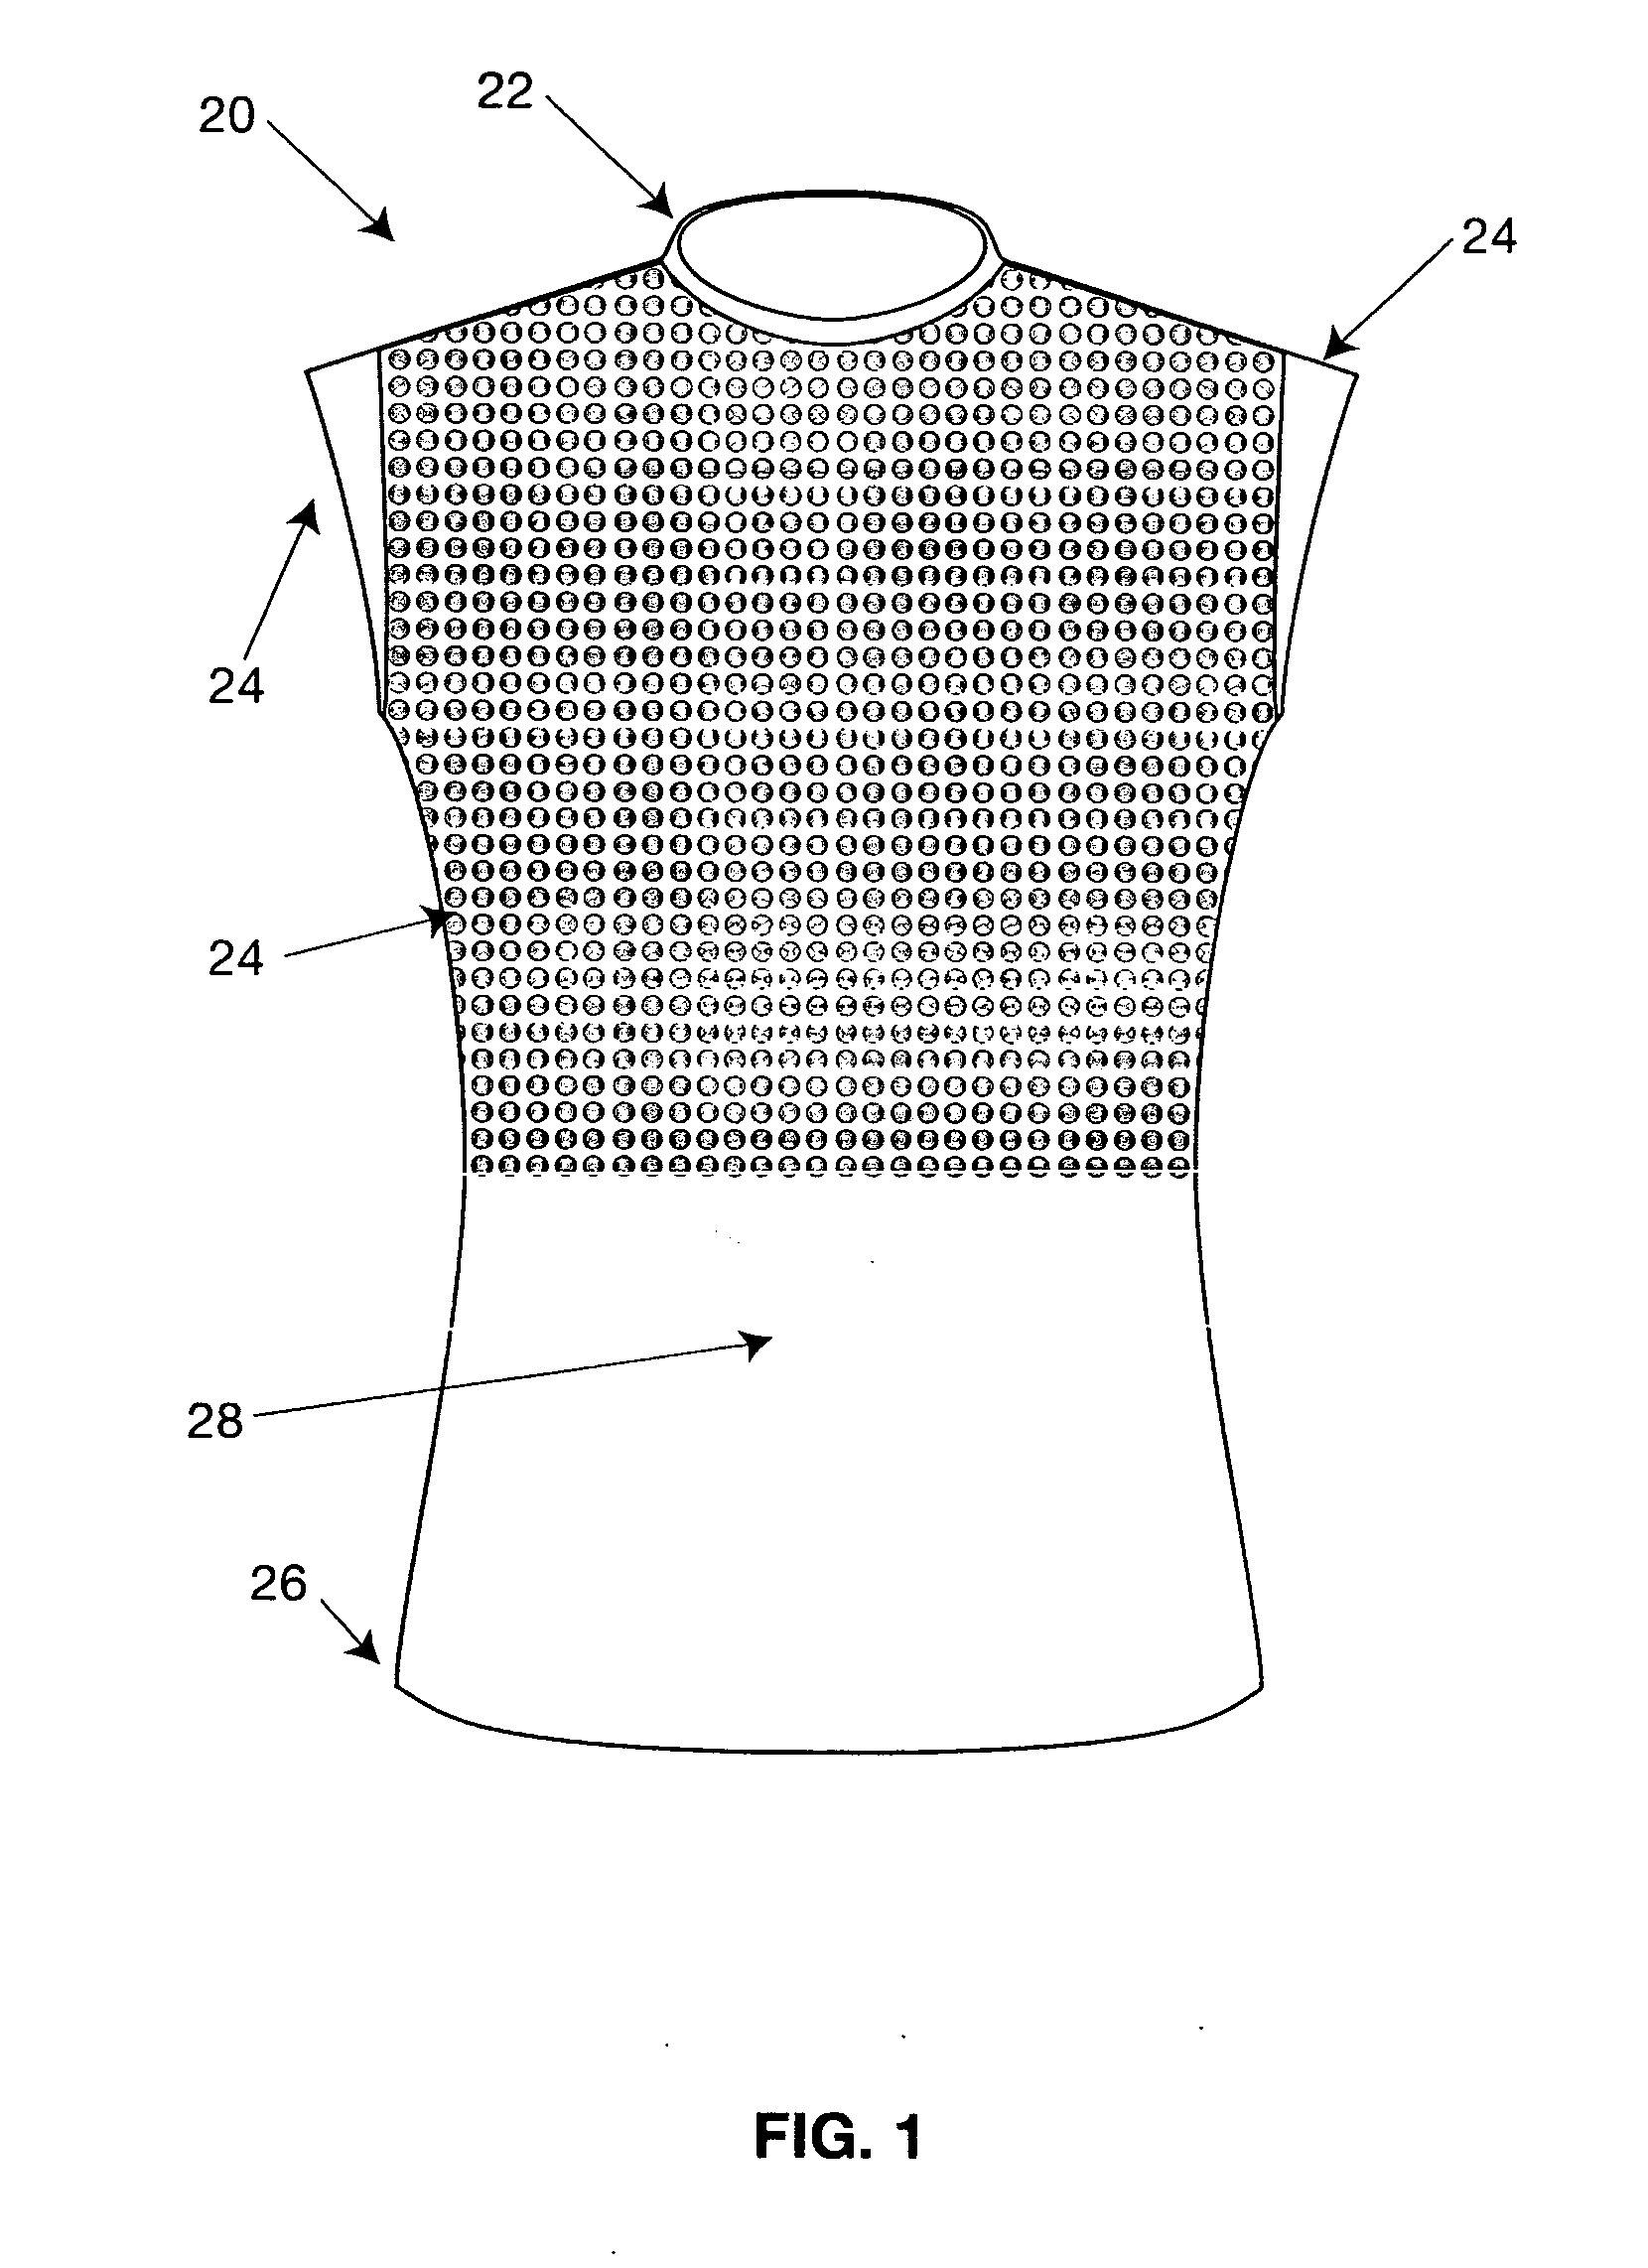 3-D fabric knitted stretch spacer material having molded domed patterns and method of making